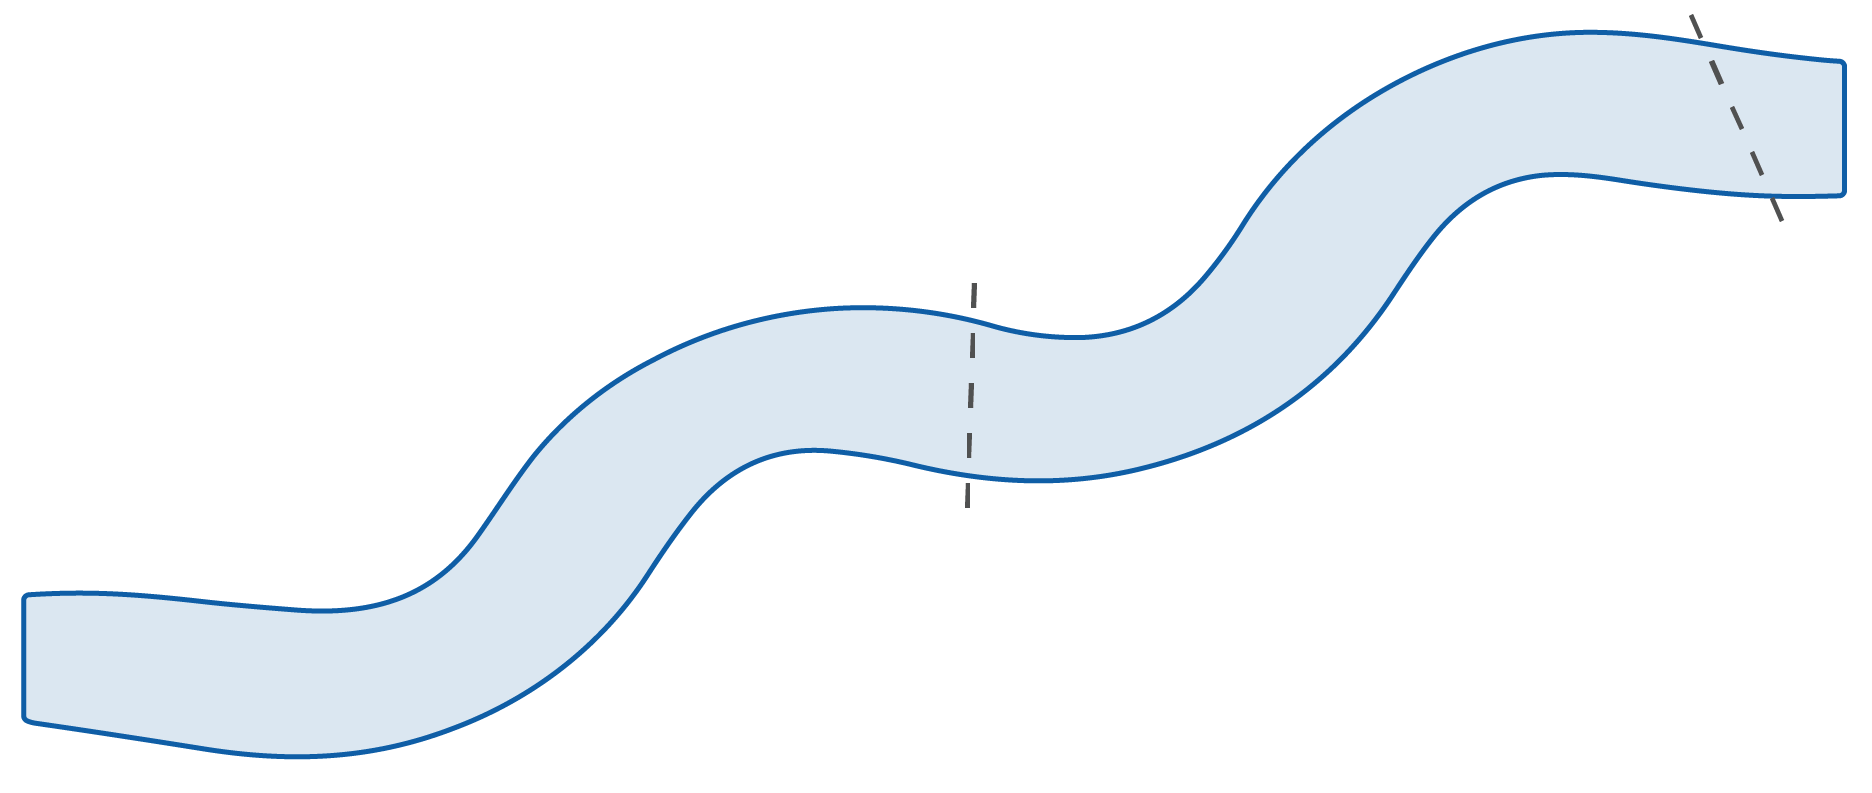 Schematic of stream segment, with one transect at the midpoint and another at the upstream end.